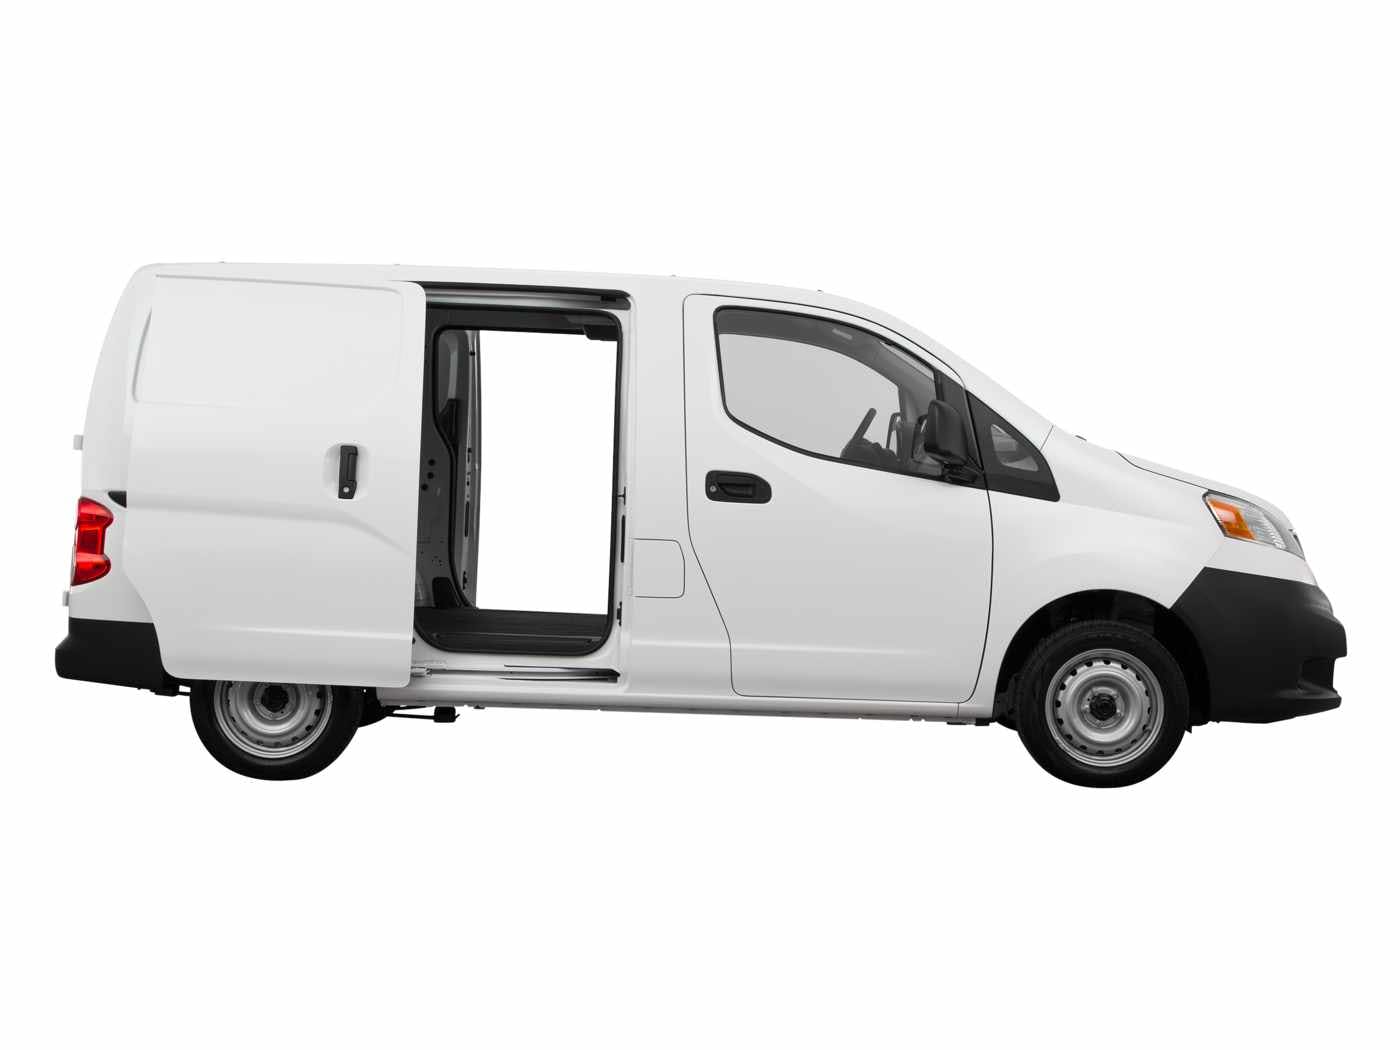 Nissan NV200 Compact Cargo Gets More Equipment for 2017 - autoevolution